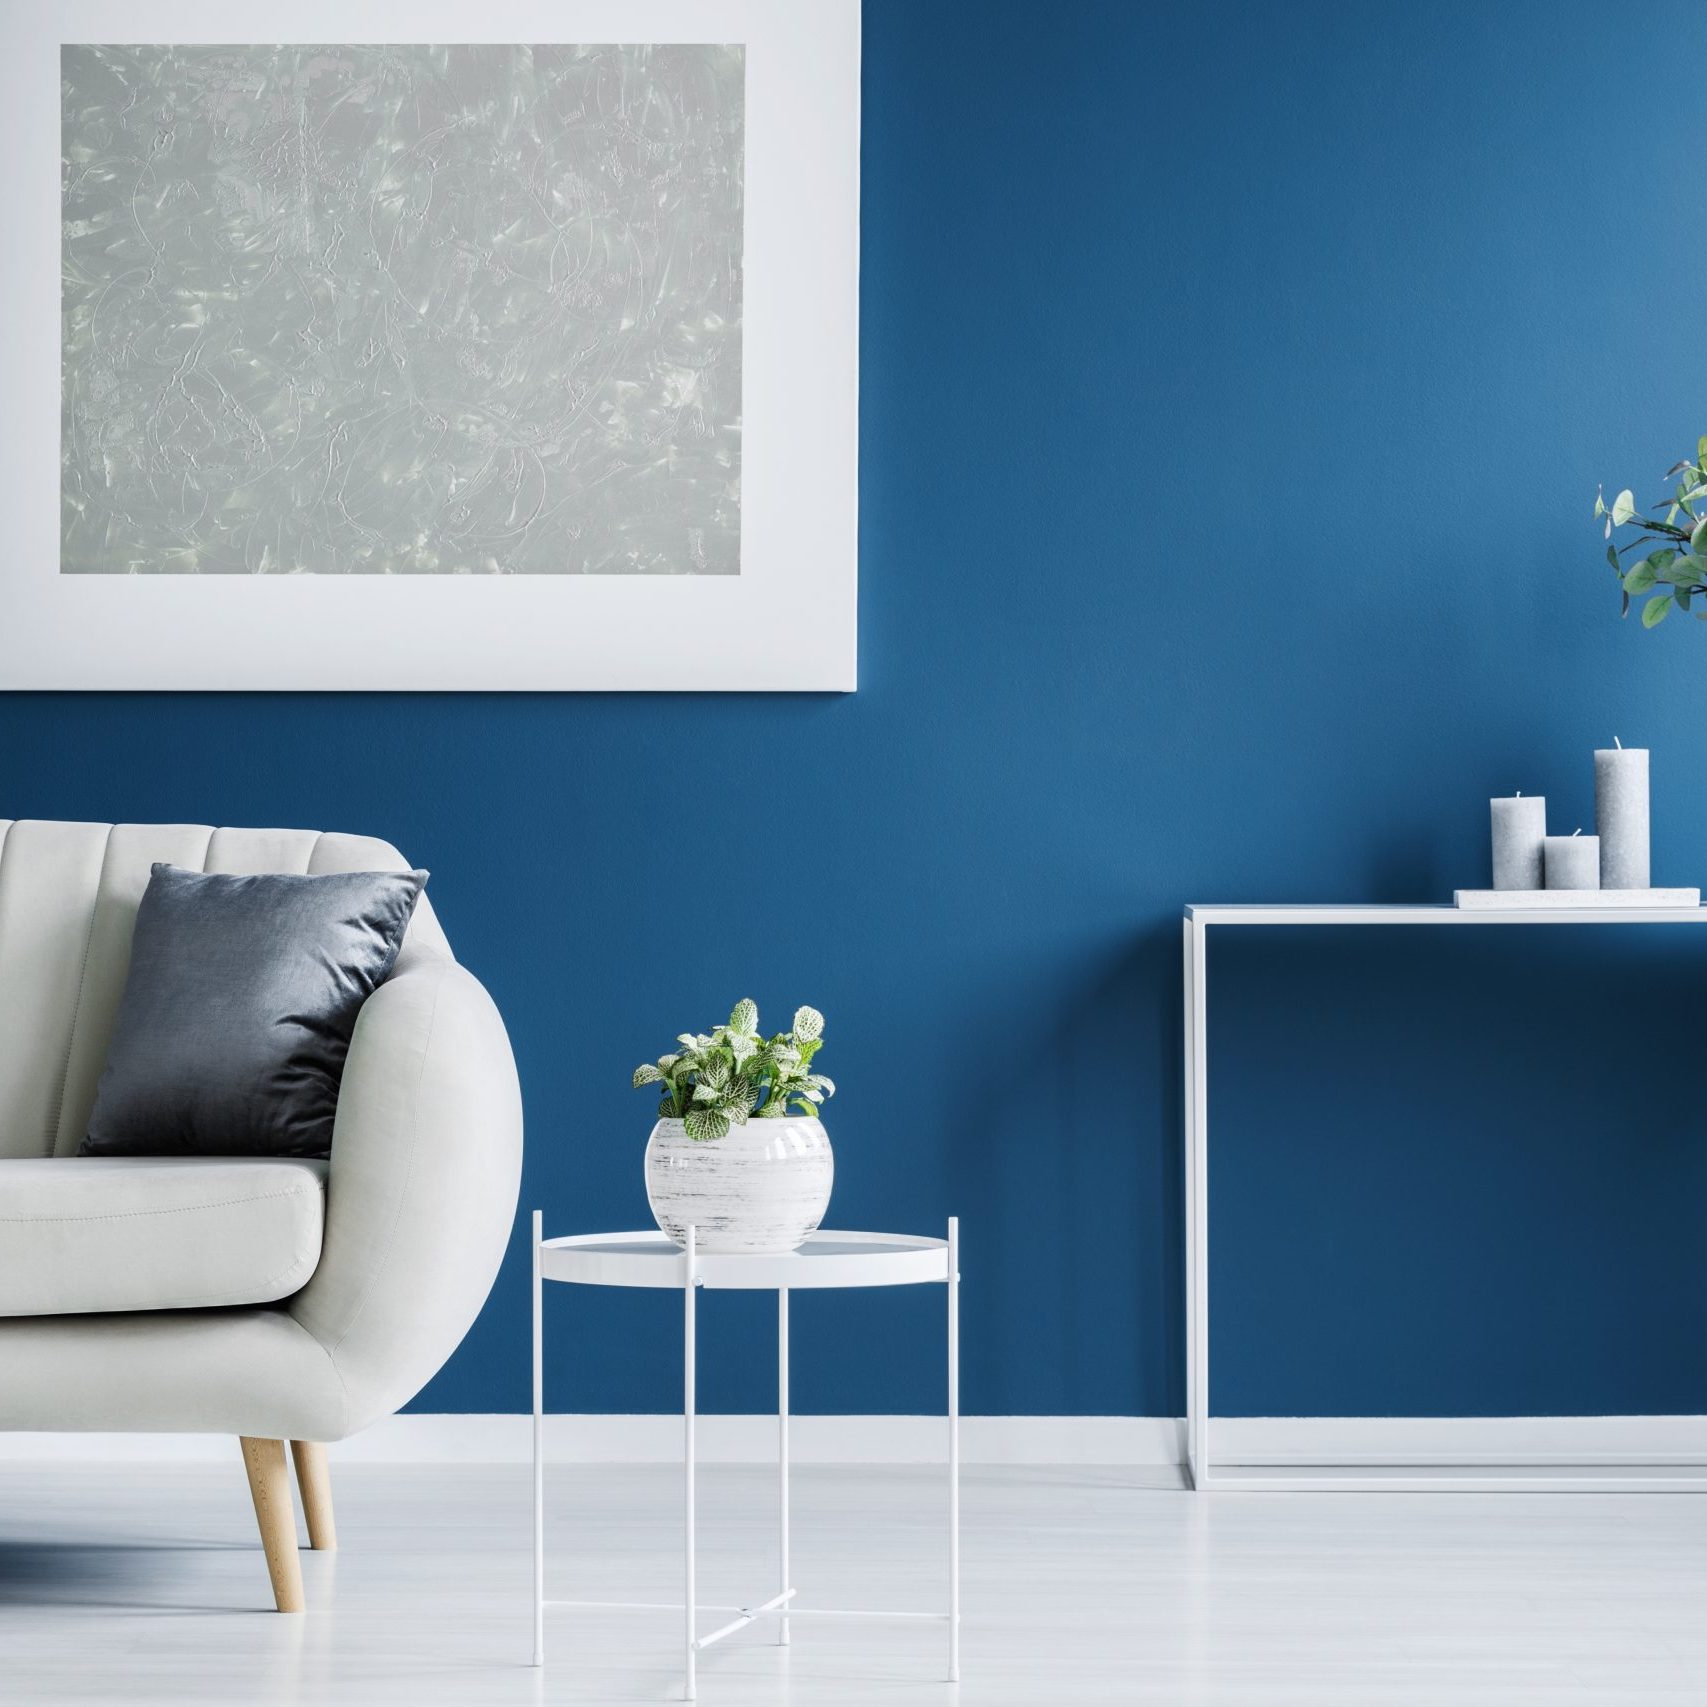 Metal console table with plant in vase and candles standing against blue wall in living room interior with light grey sofa and modern poster